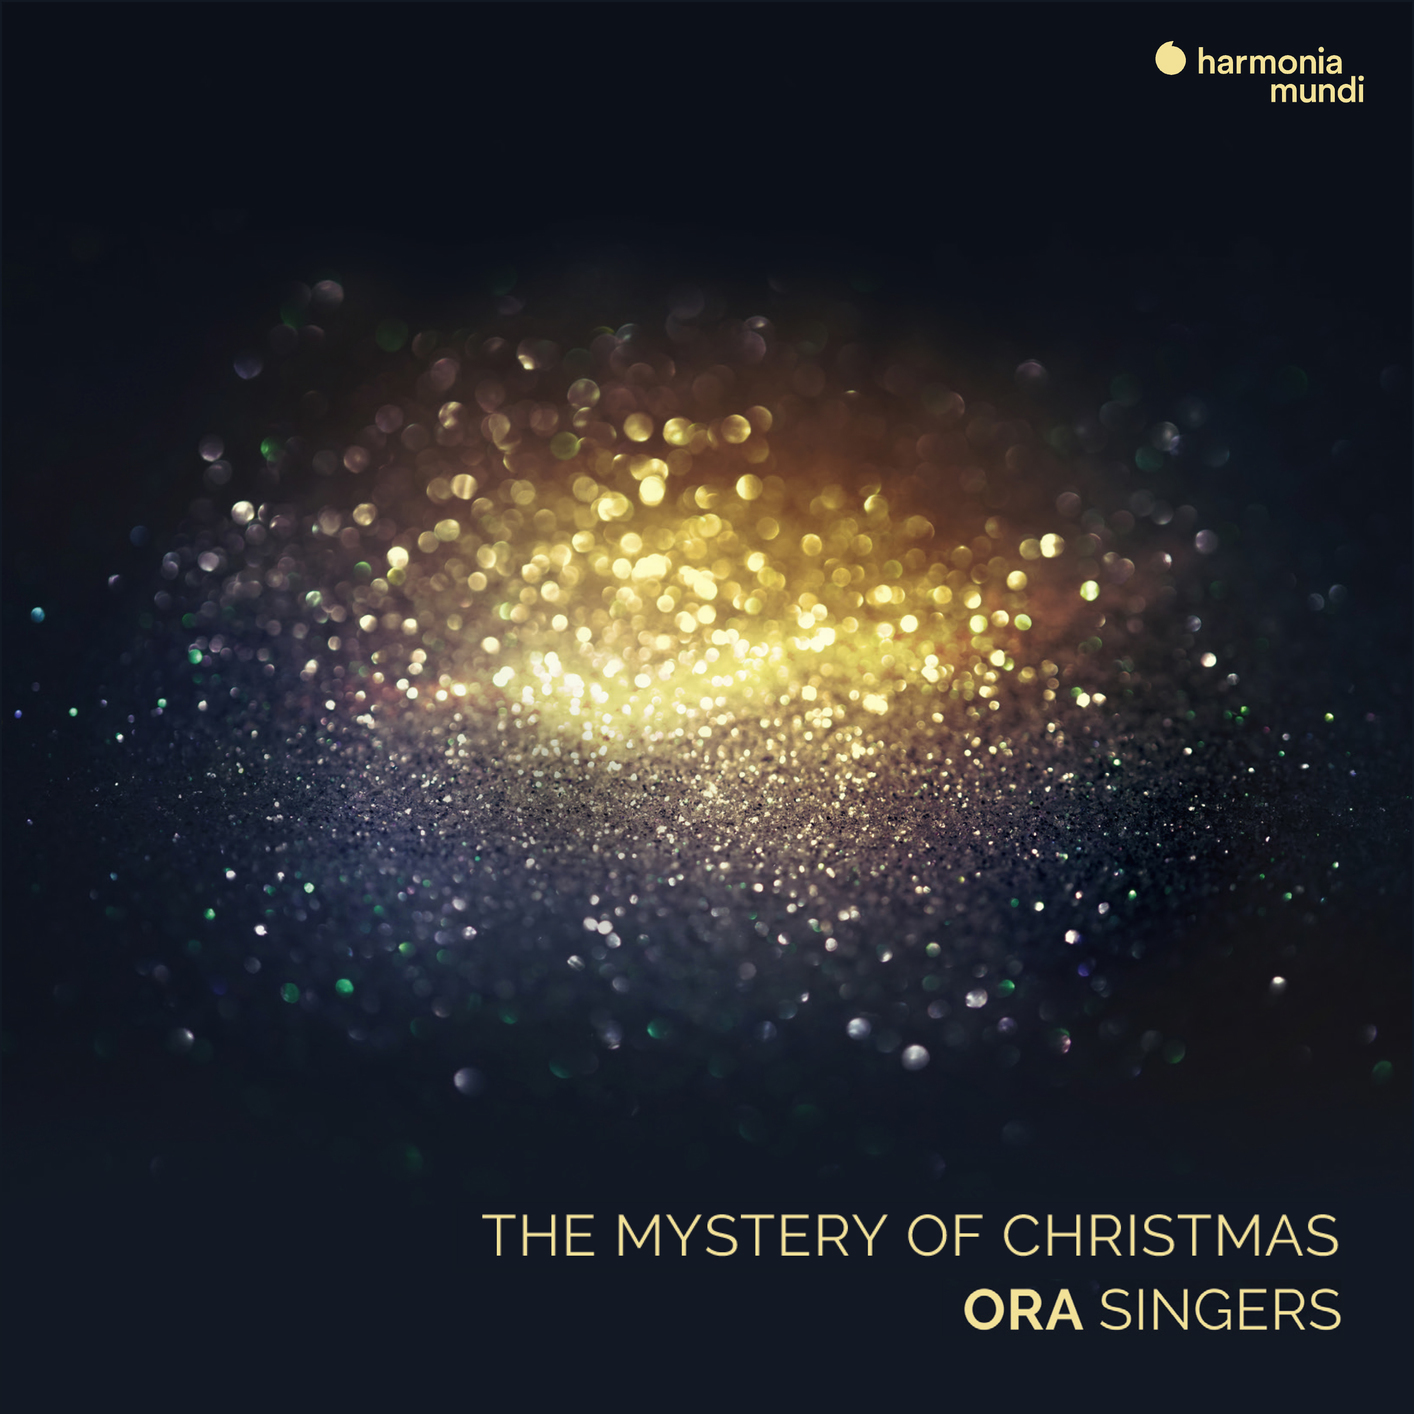 Suzi Digby and Ora Singers – The Mystery of Christmas (2018) [FLAC 24bit/96kHz]